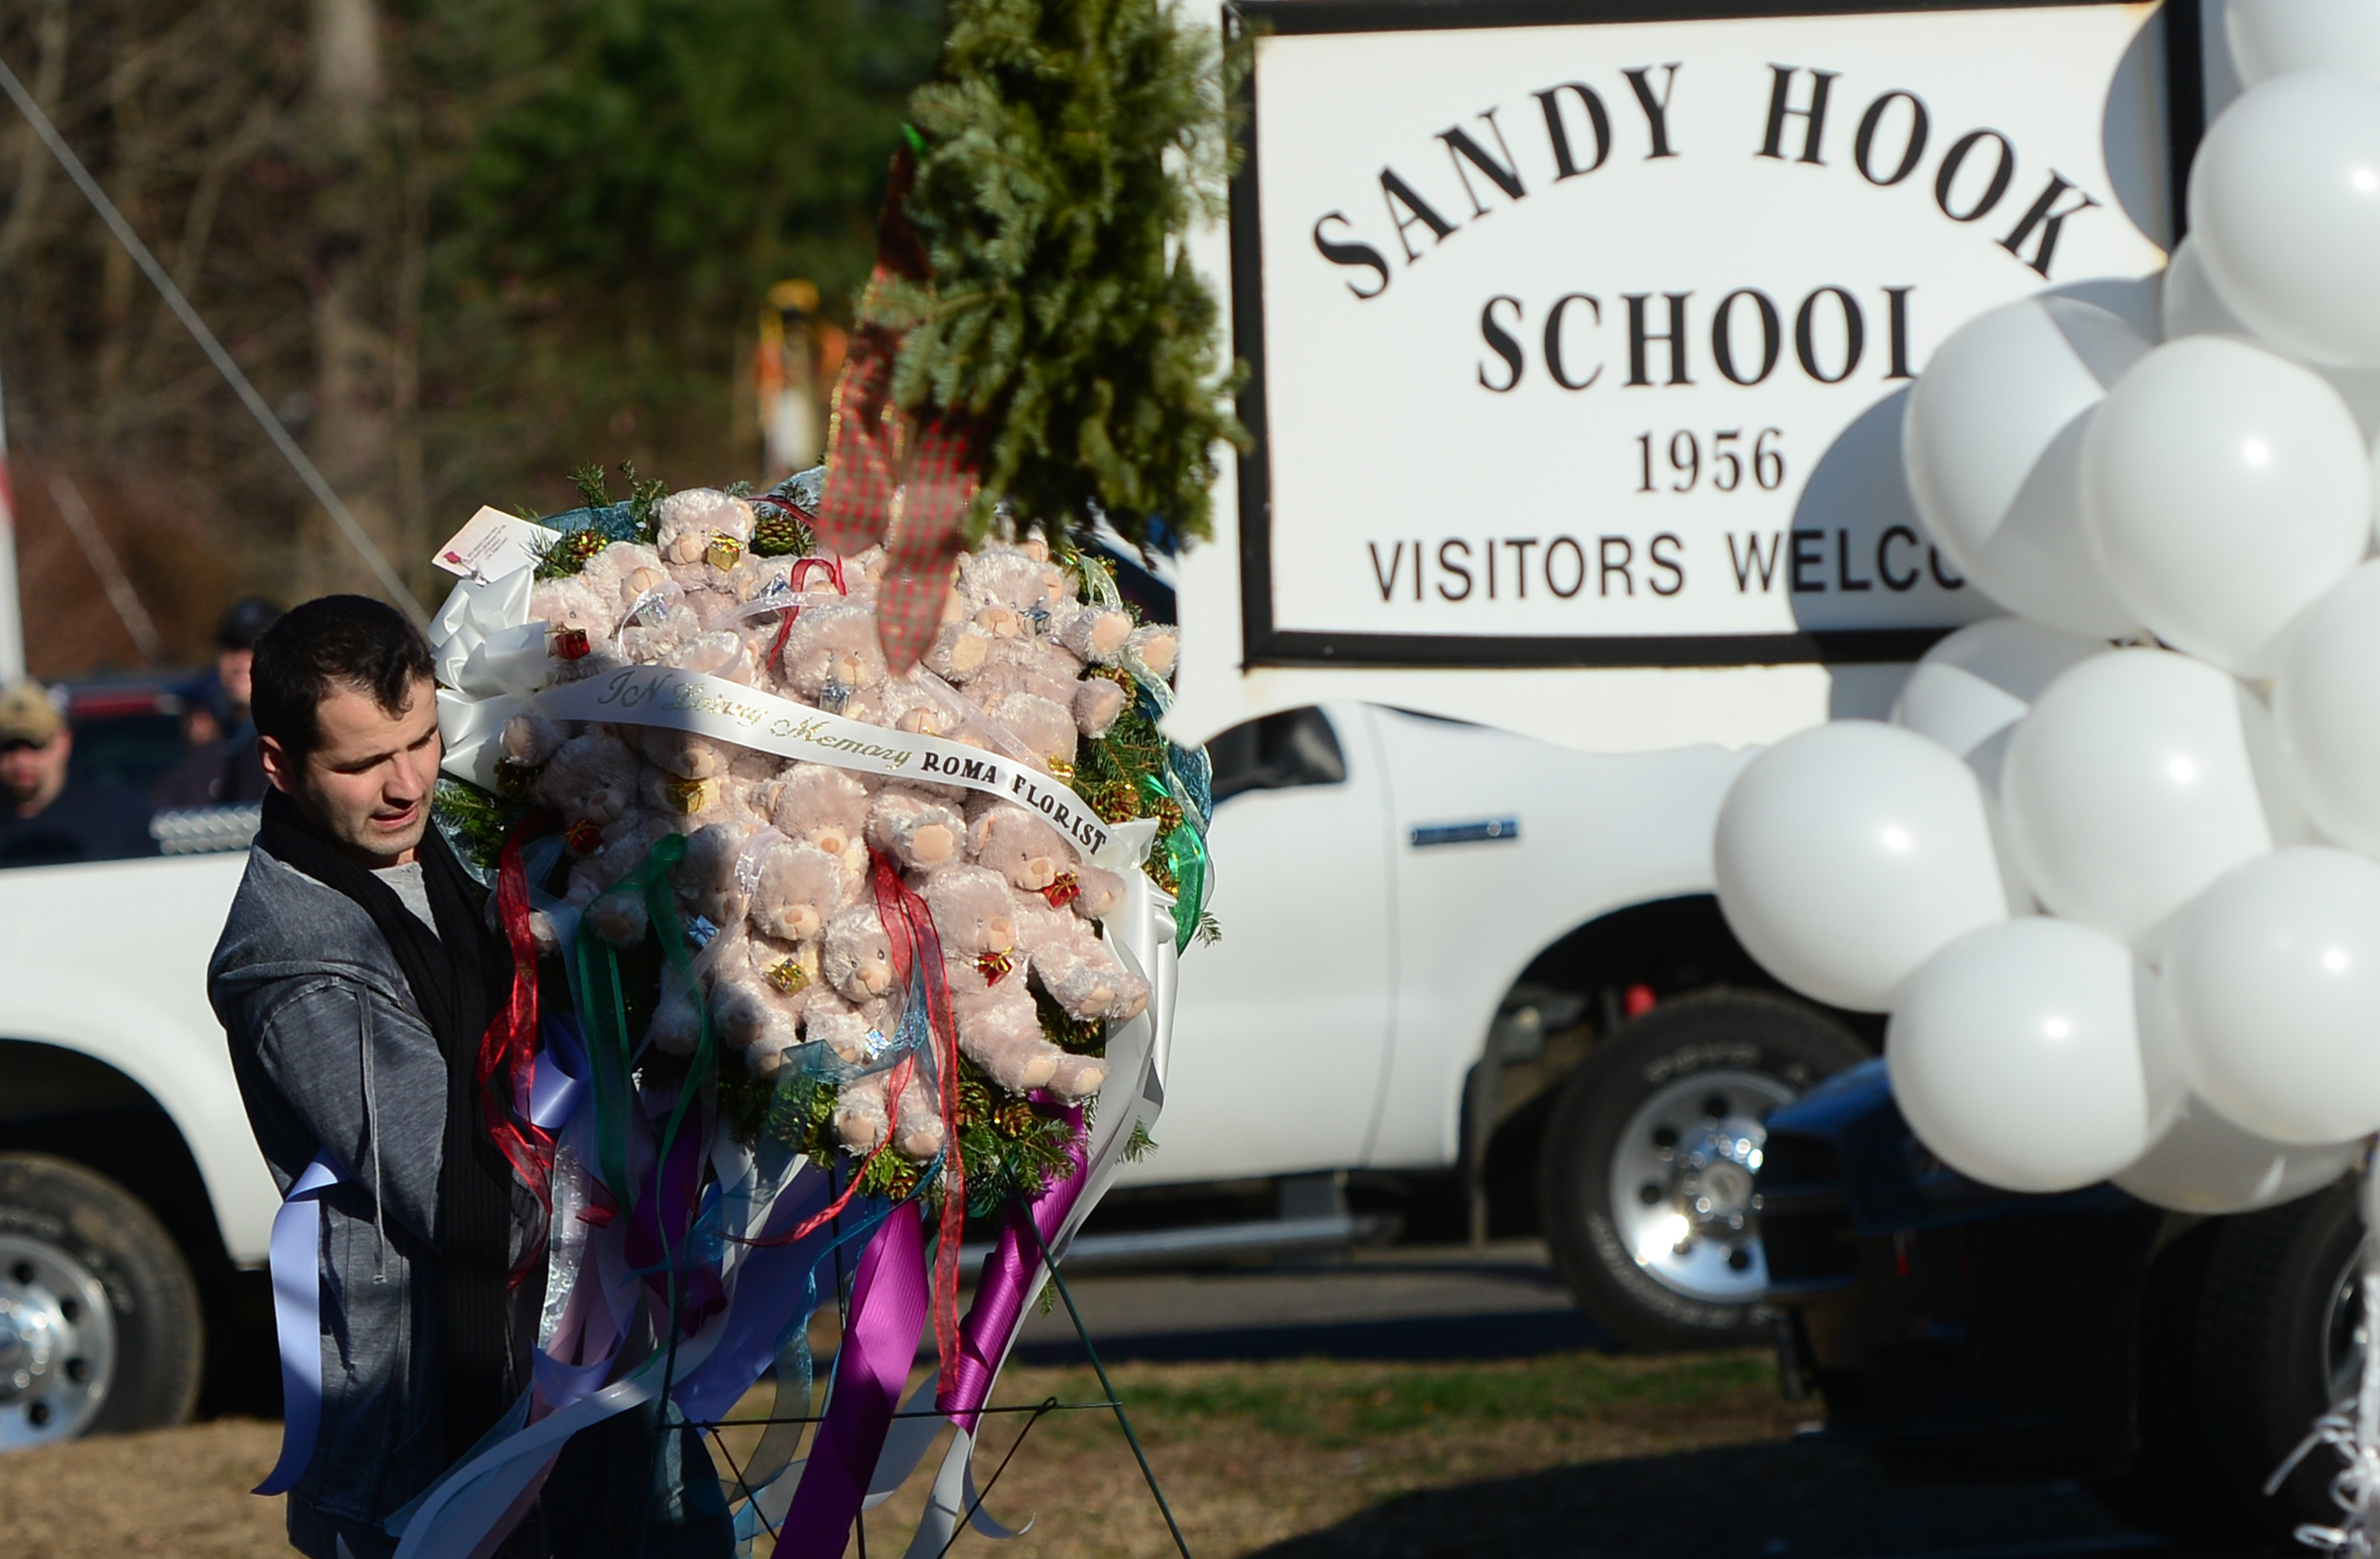 A man pays tribute to the victims of an elementary school shooting in Newtown, Connecticut, on December 15, 2012. (EMMANUEL DUNAND—AFP/Getty Images)